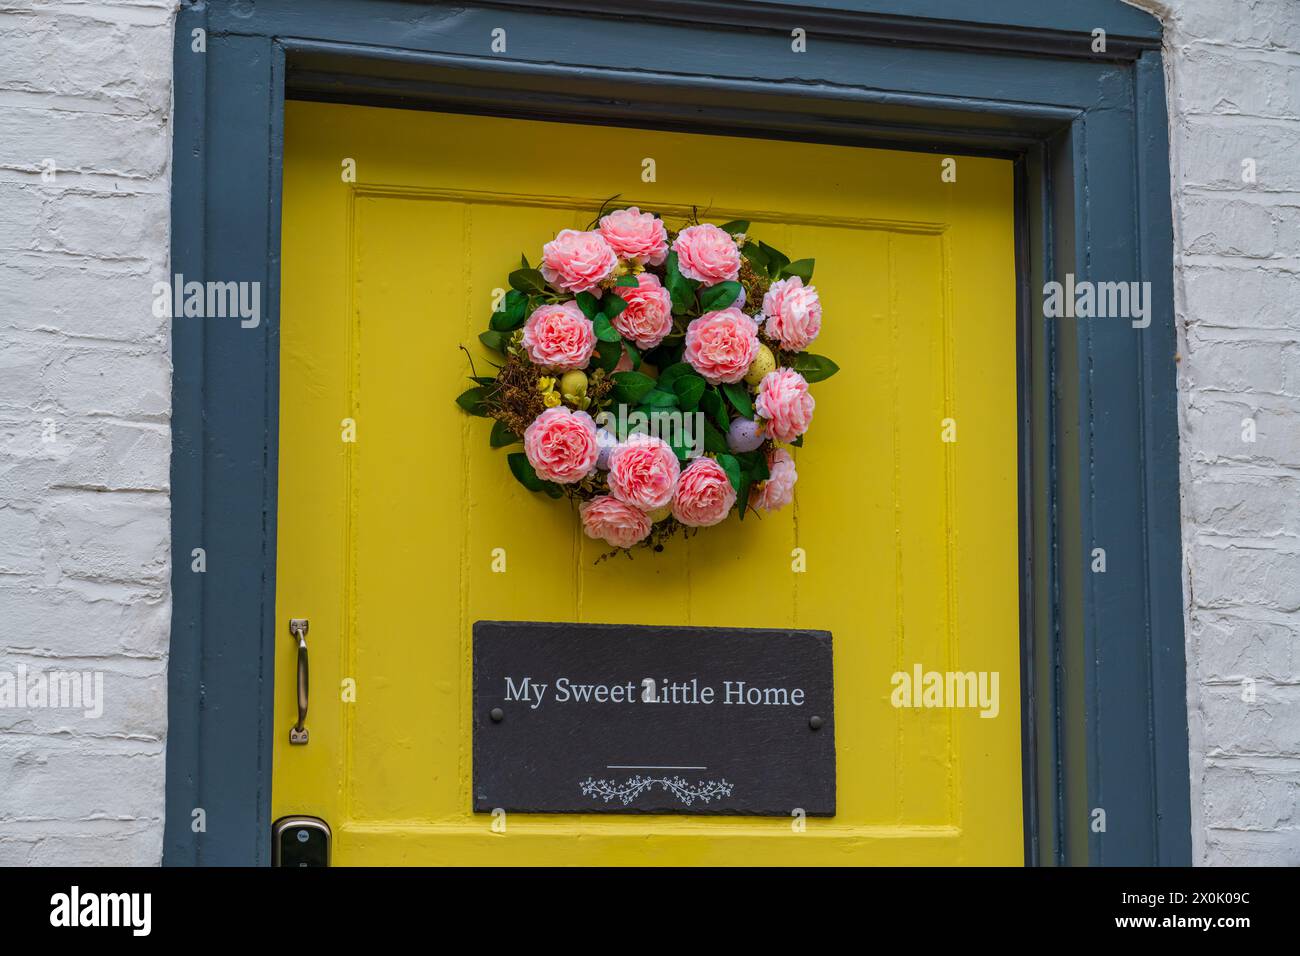 Yellow front door with a plaque title 'My sweet little home' and a pink coloured rose wreath Stock Photo